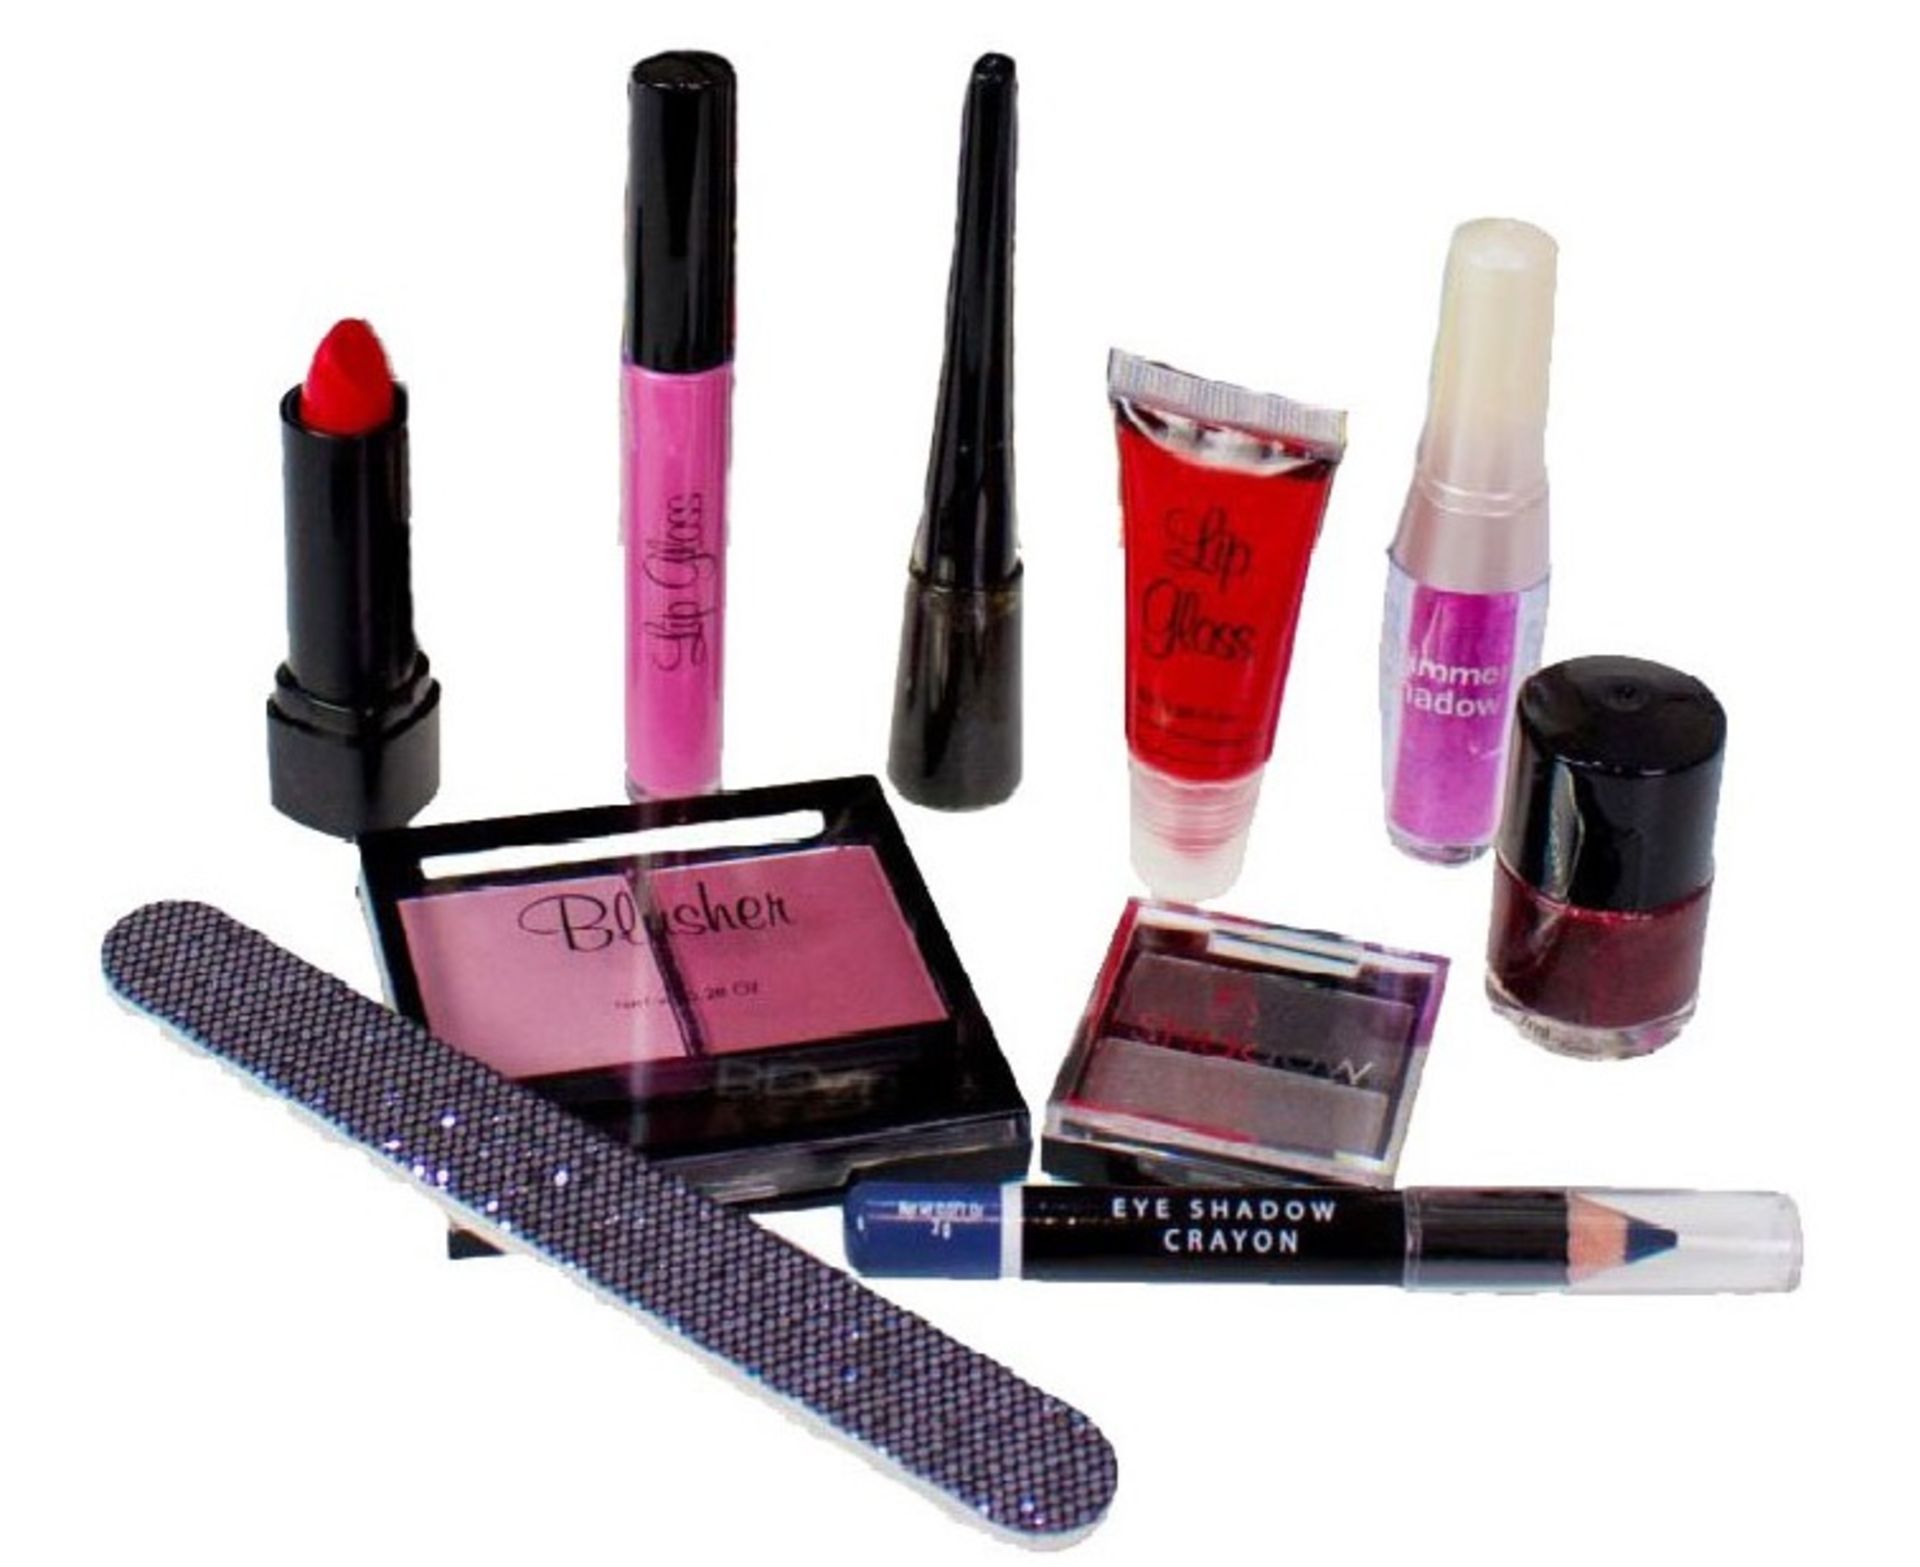 V Brand New Ten Beauty Product Selection in Gift Bag (Contents vary)